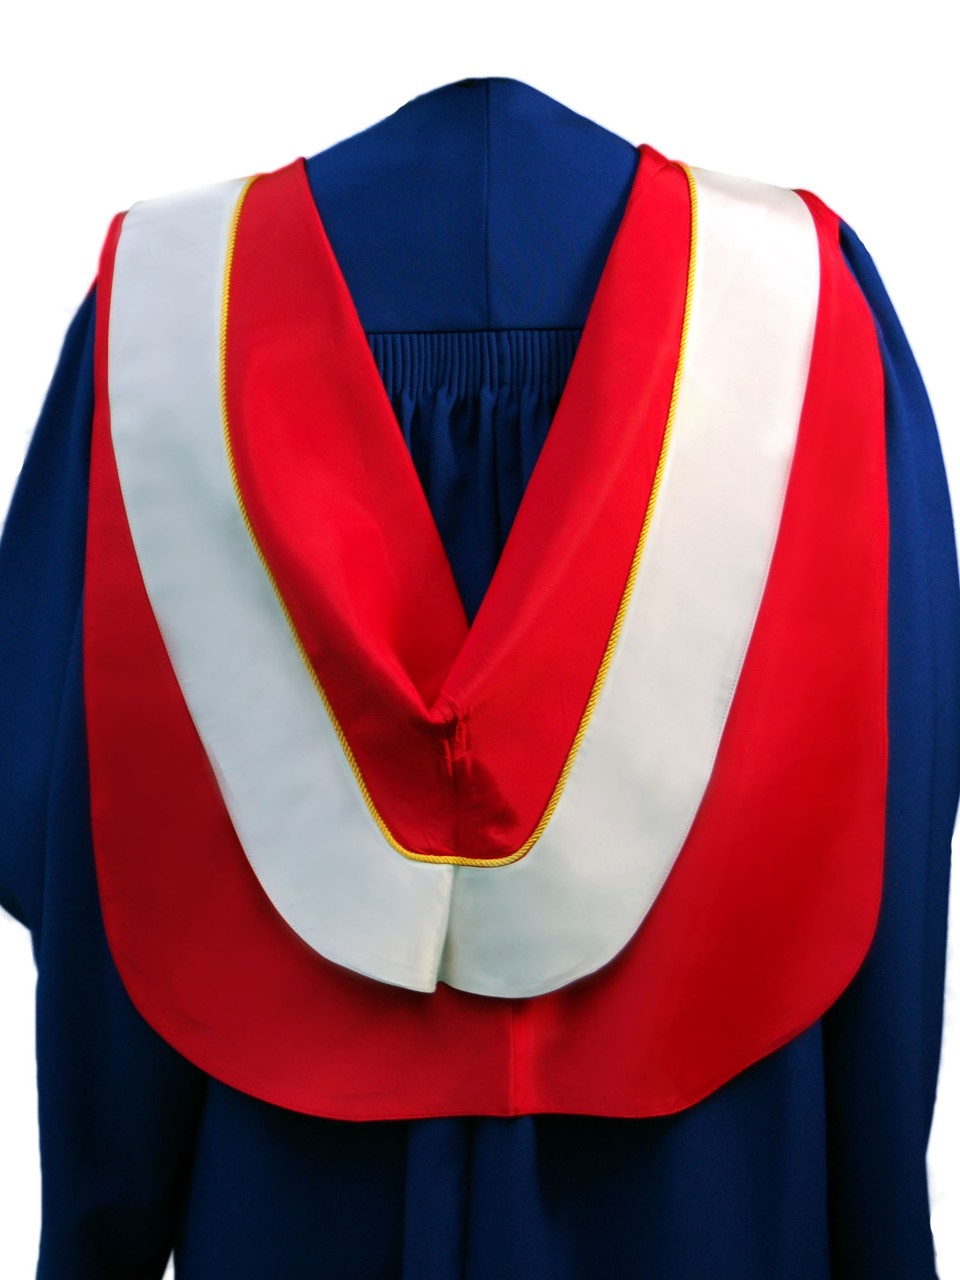 The Master of Science in the Faculty of Education hood is red with wide white border and gold cording